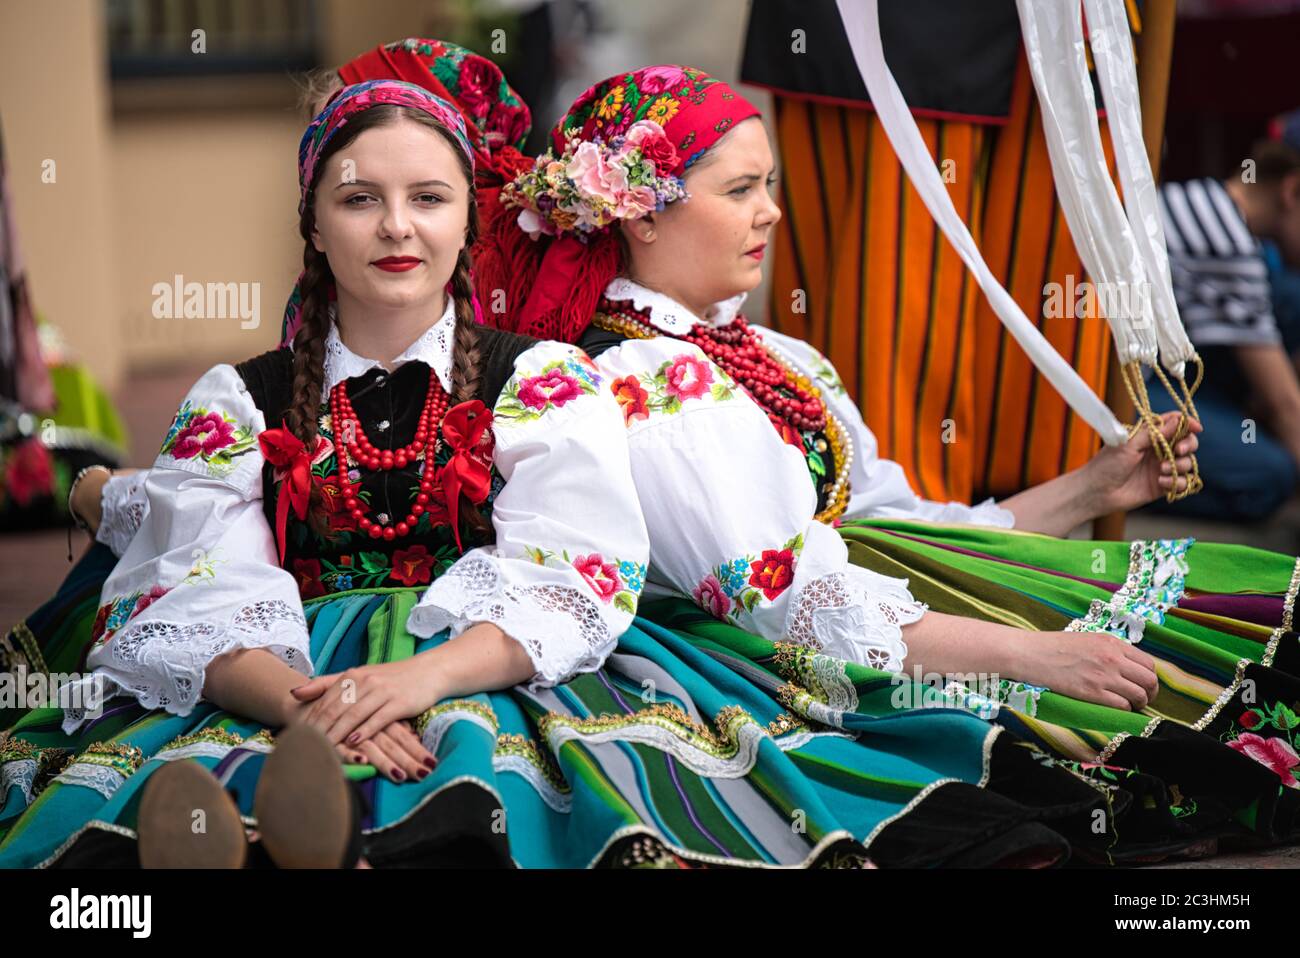 Lowicz, Jun 11, 2020: Girls dressed in polish national folk costumes from Lowicz region during annual Corpus Christi procession. Polish culture Stock Photo